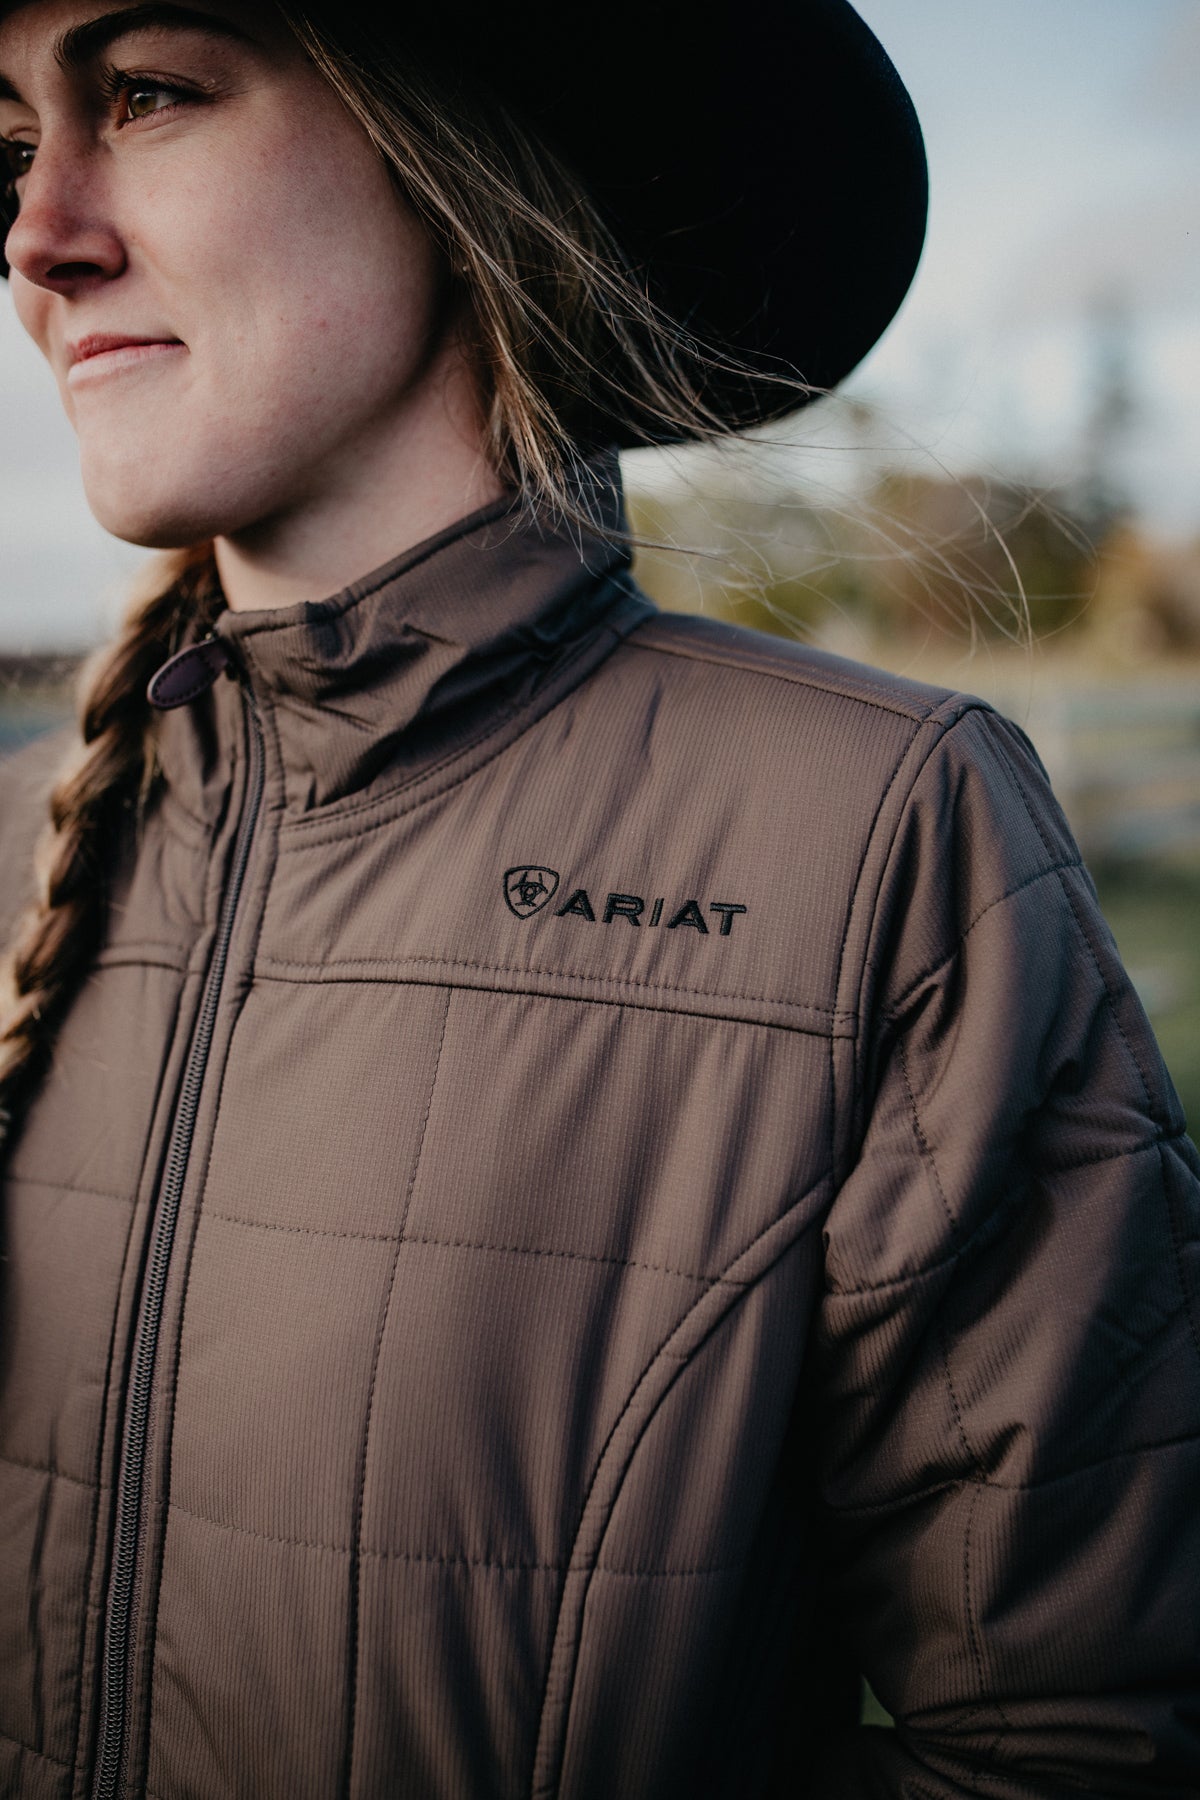 ‘Mammoth Cave’ Women's Cruis Banyon Bark Insulated Ariat Jacket (XS - M Only)